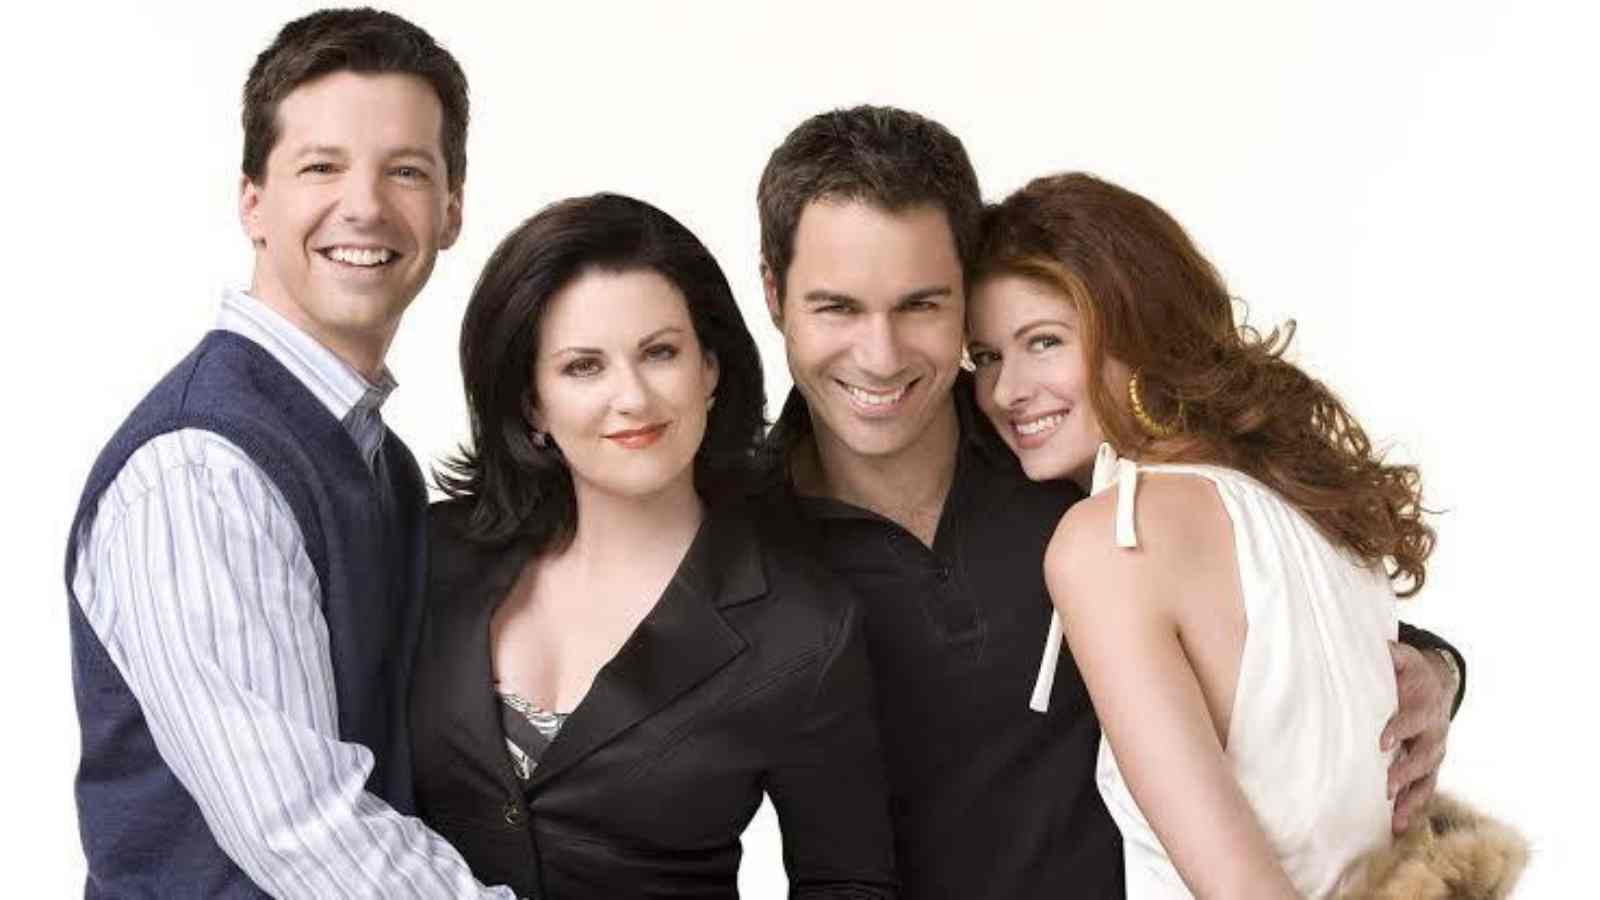 Why did Will & Grace have another season after a decade